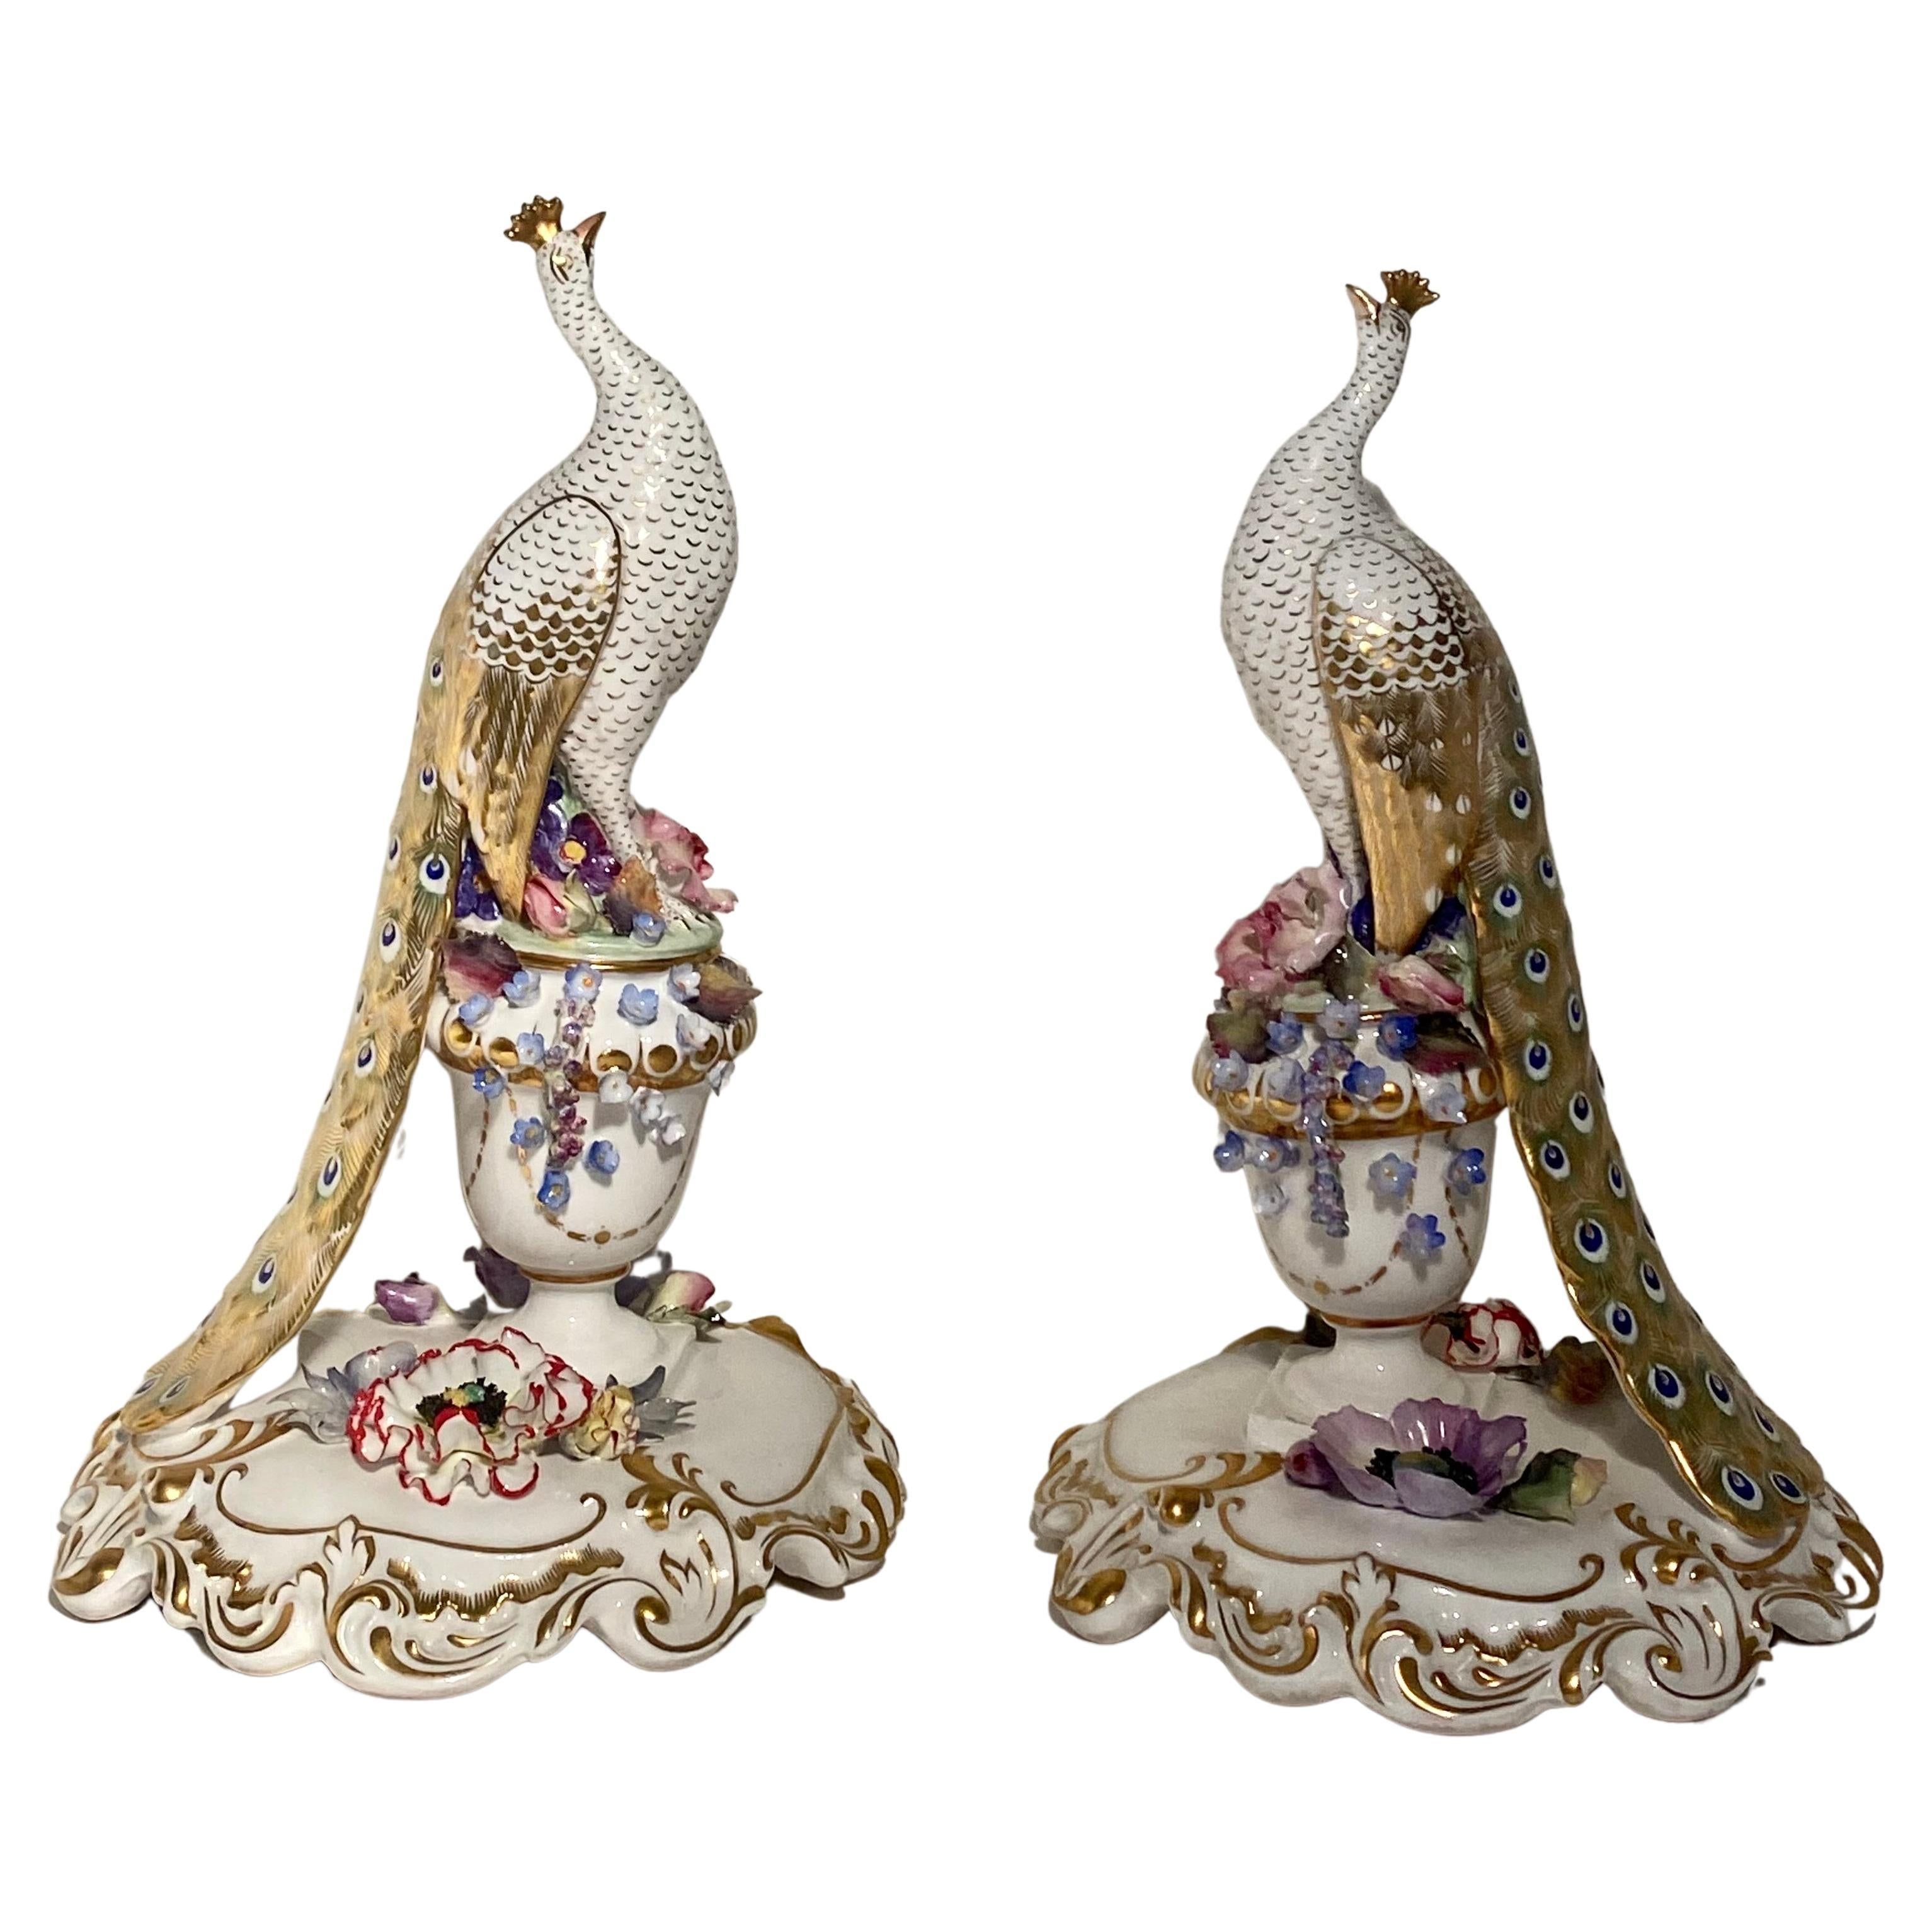 Royal Crown Derby Porcelain Figure, Modelled as a Peacock For Sale 9